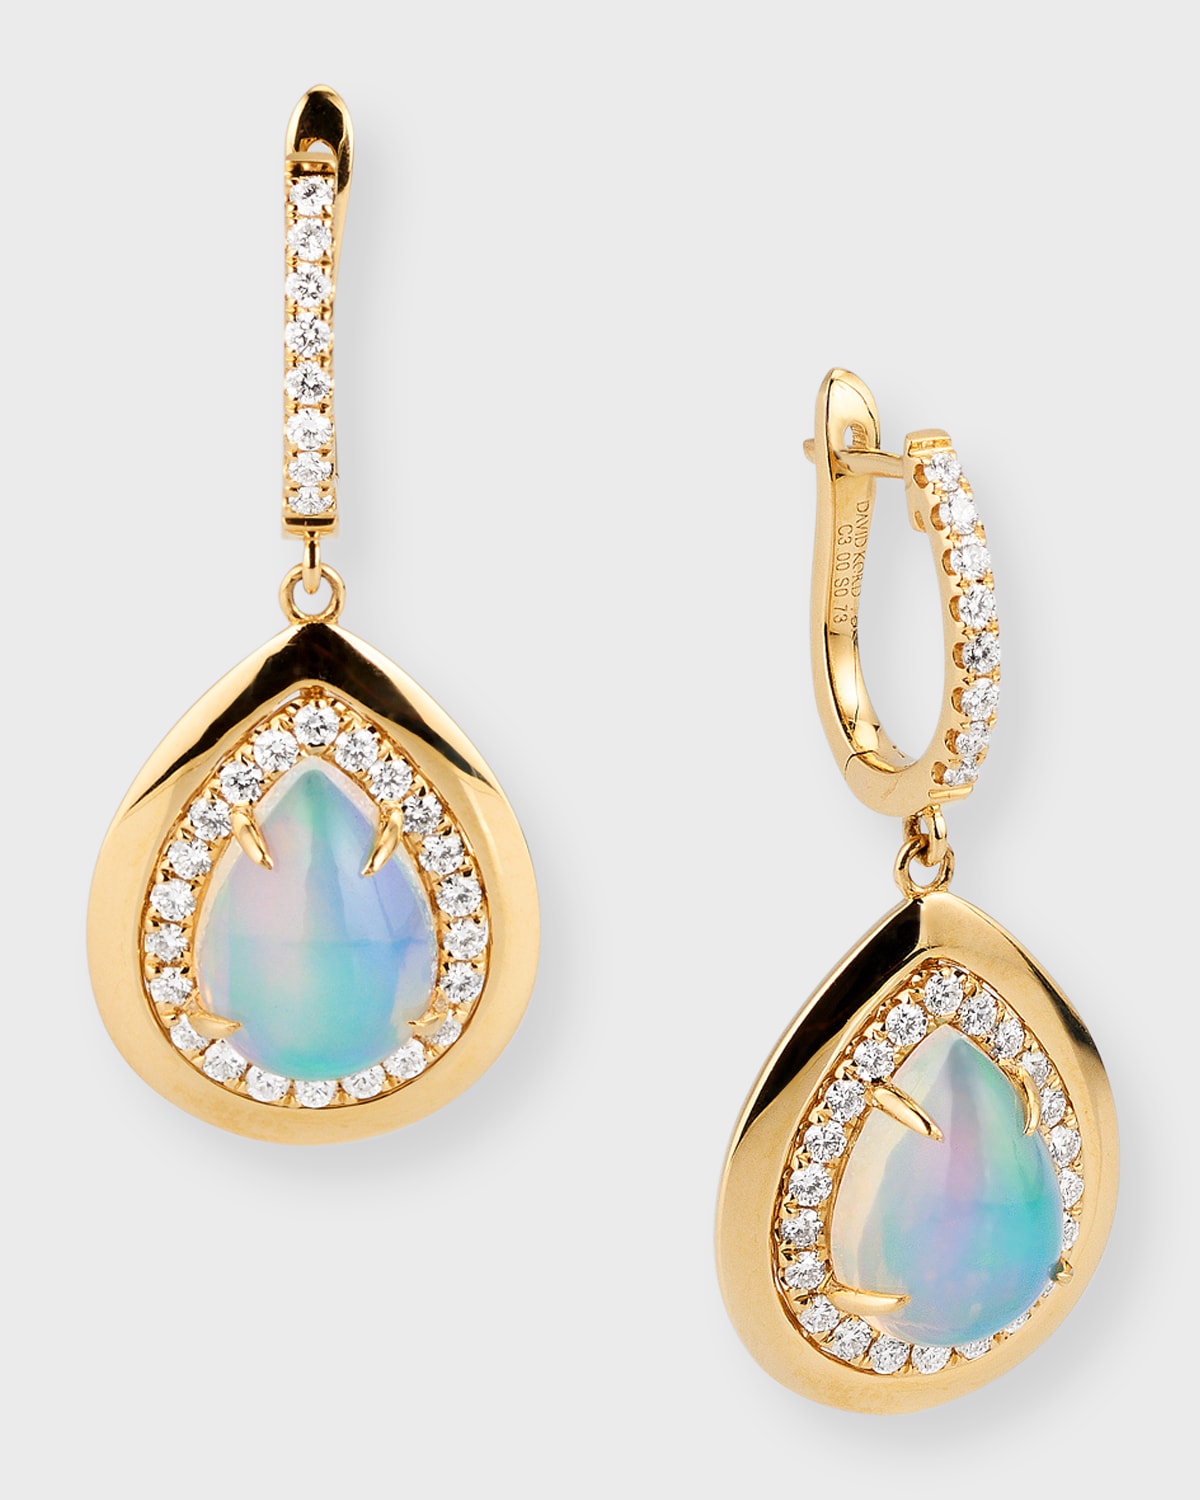 18K Yellow Gold Earrings with Pear-Shape Opal and Diamonds, 3.0tcw